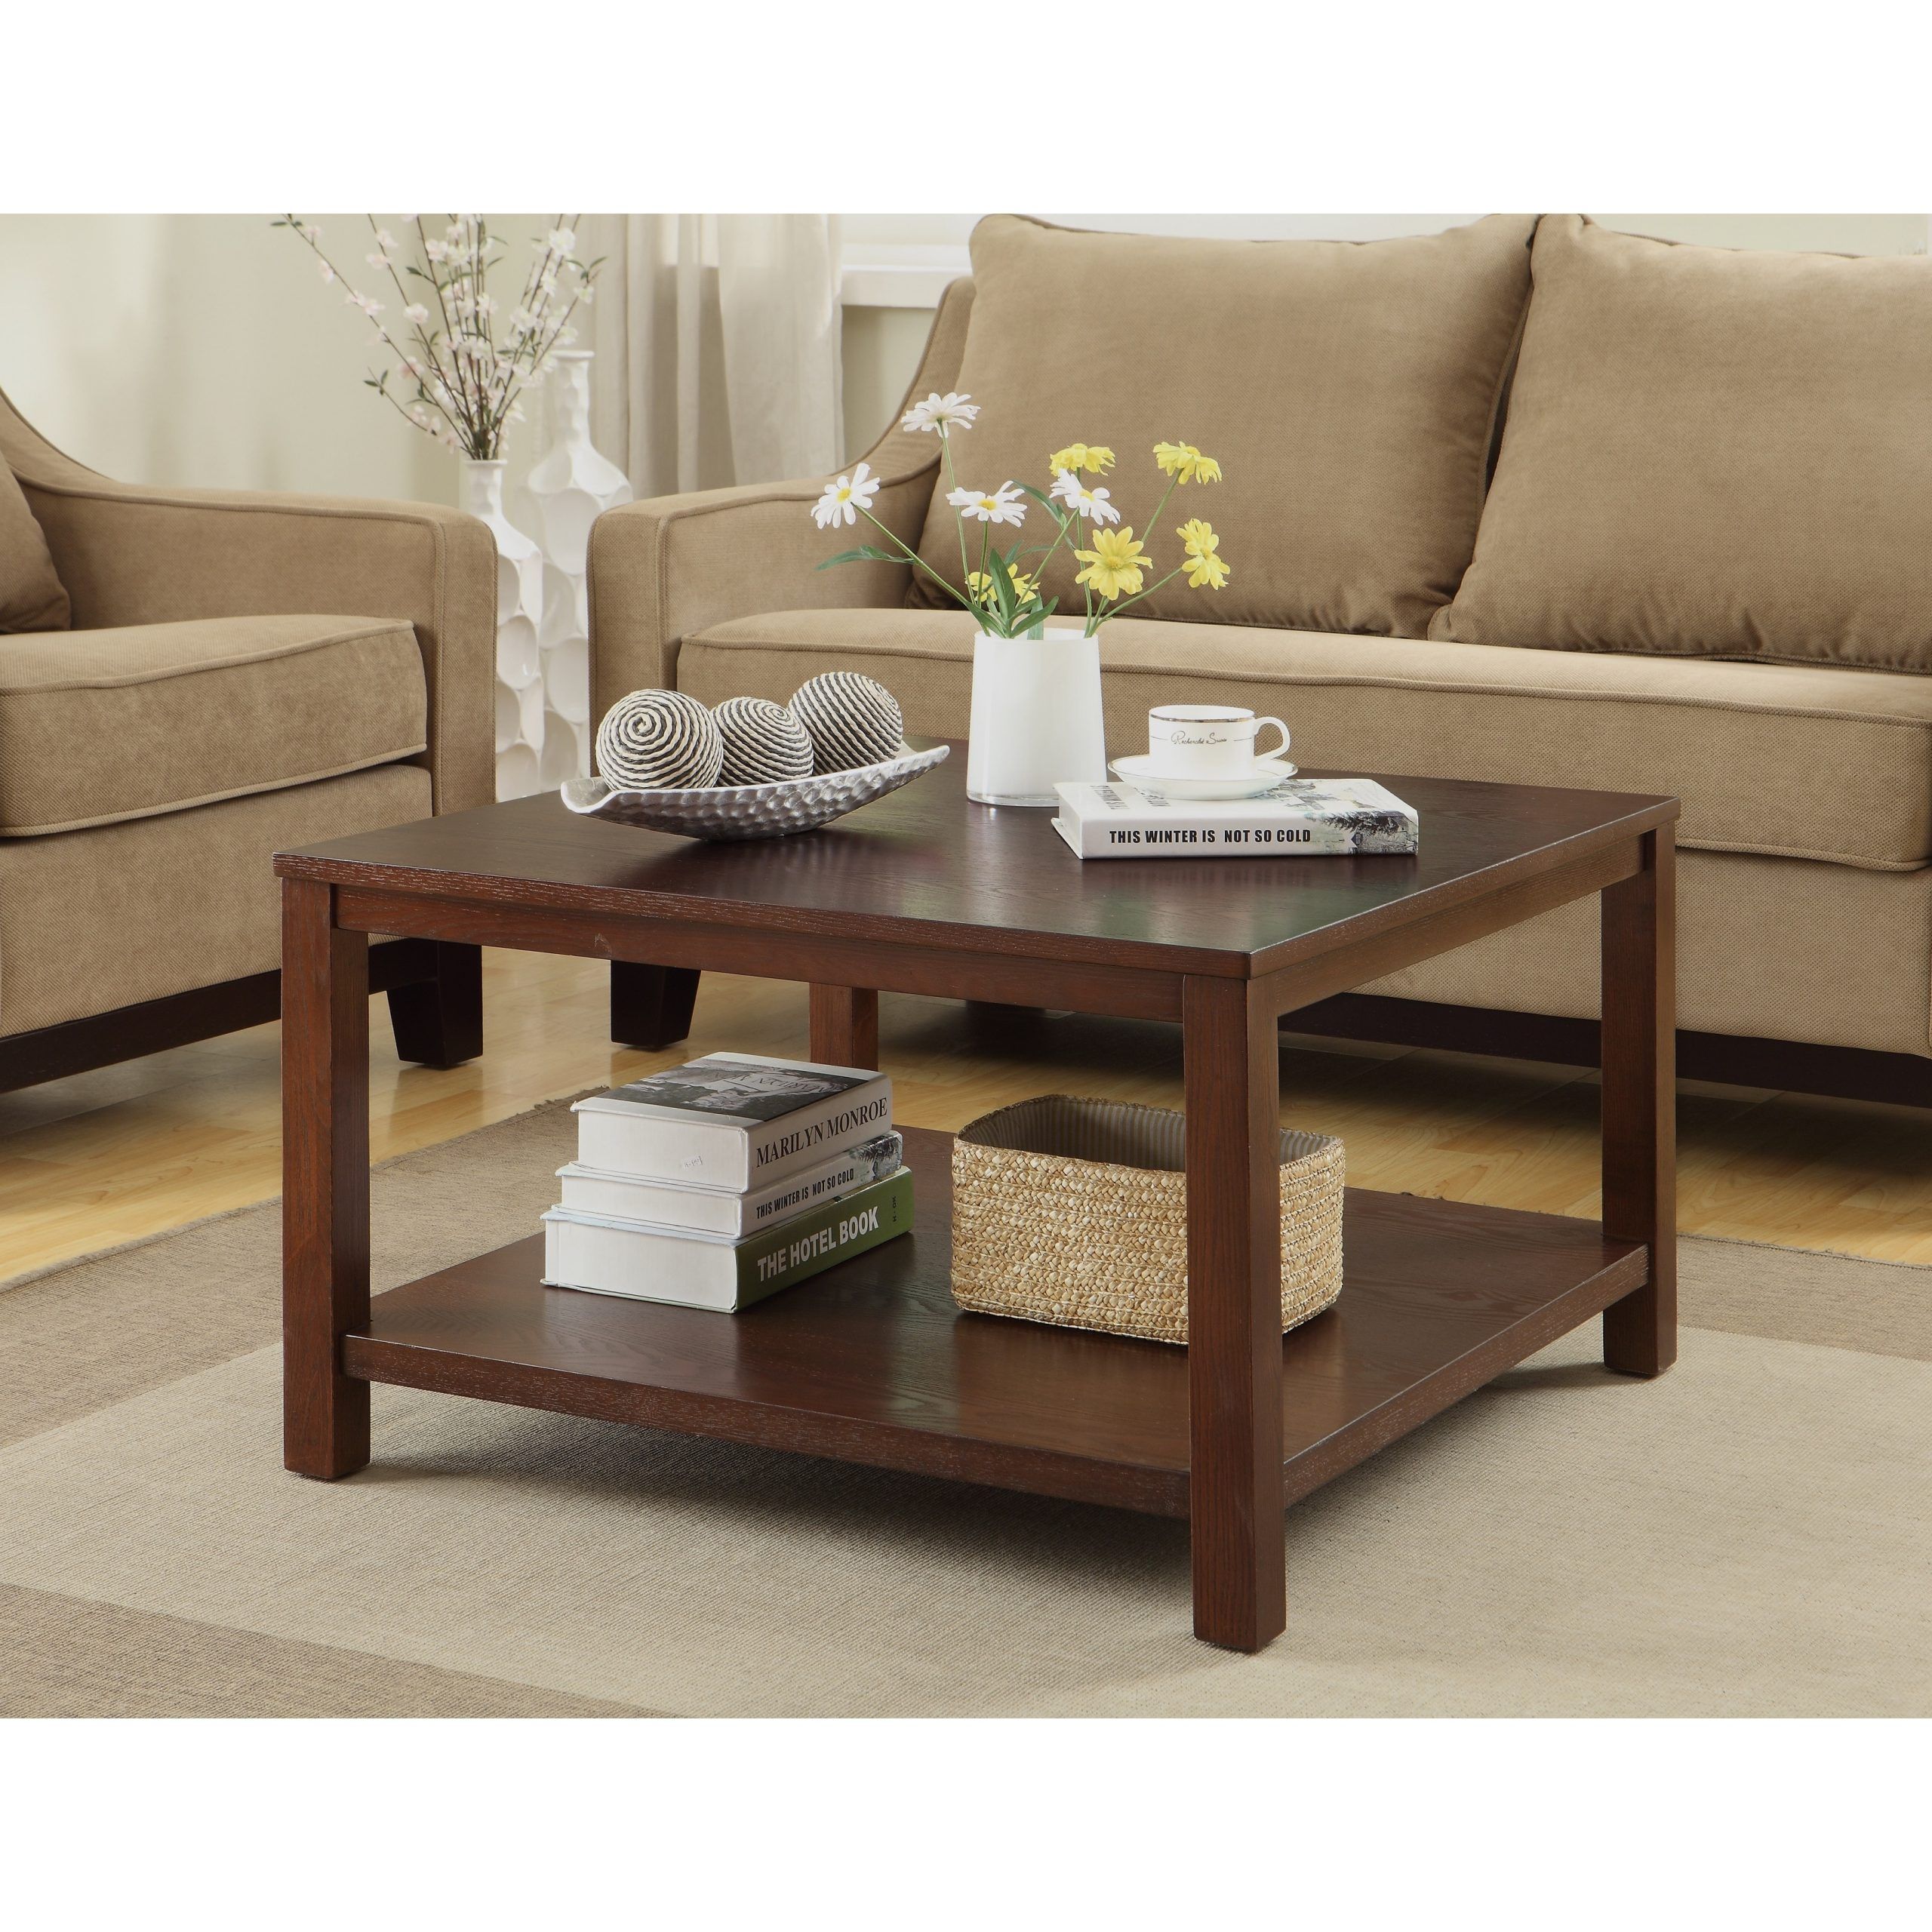 Square Coffee Table With Dual Shelves Solid Wood Legs & Wood | Ebay With Coffee Tables With Solid Legs (View 10 of 20)